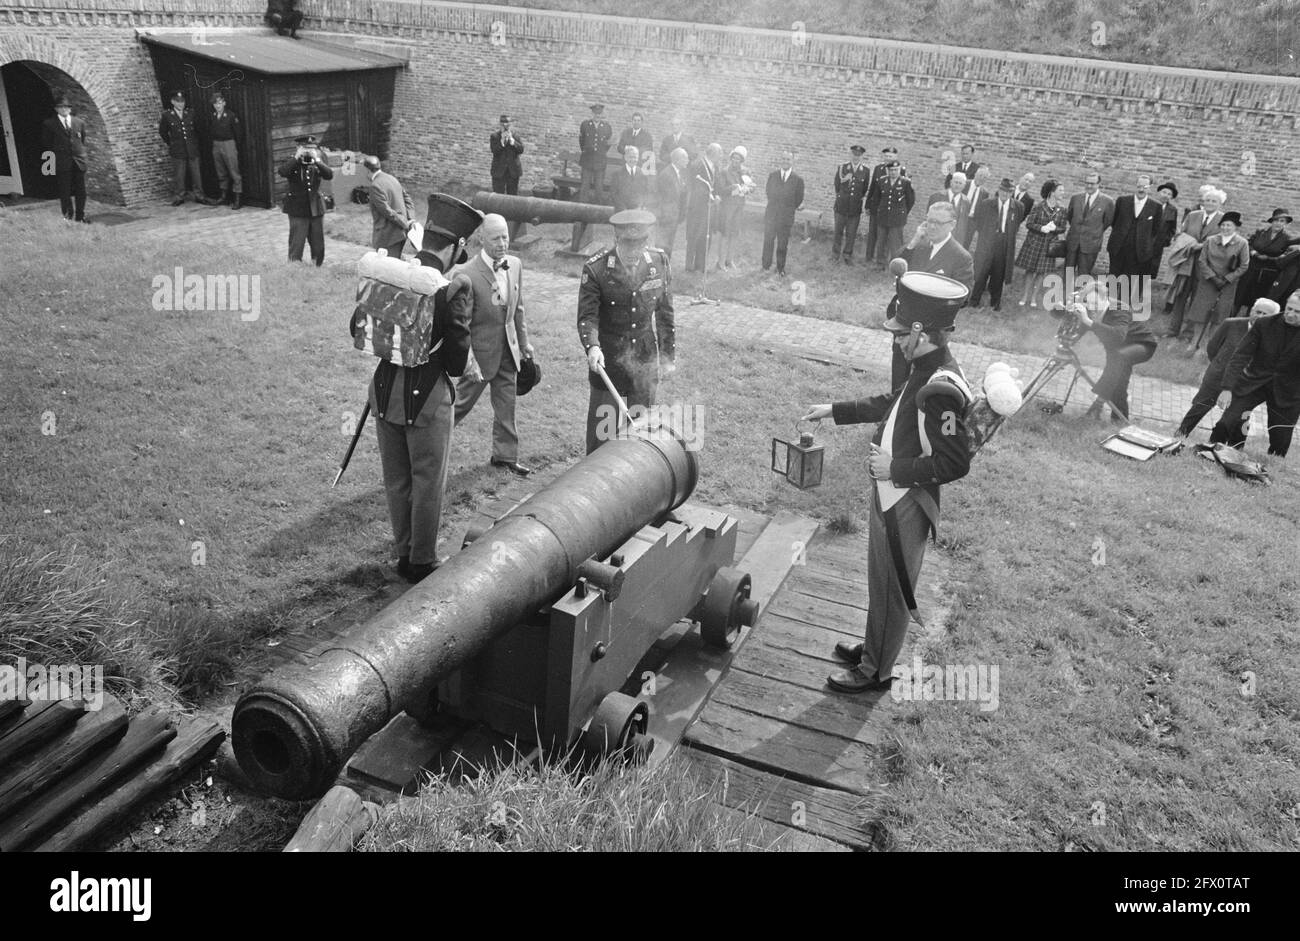 HRH Prince Bernhard opens expansion of the Fortress Museum in Naarden Prince Bernhard sticks a fuse in a cannon, 7 May 1969, museums, openings, princes, The Netherlands, 20th century press agency photo, news to remember, documentary, historic photography 1945-1990, visual stories, human history of the Twentieth Century, capturing moments in time Stock Photo